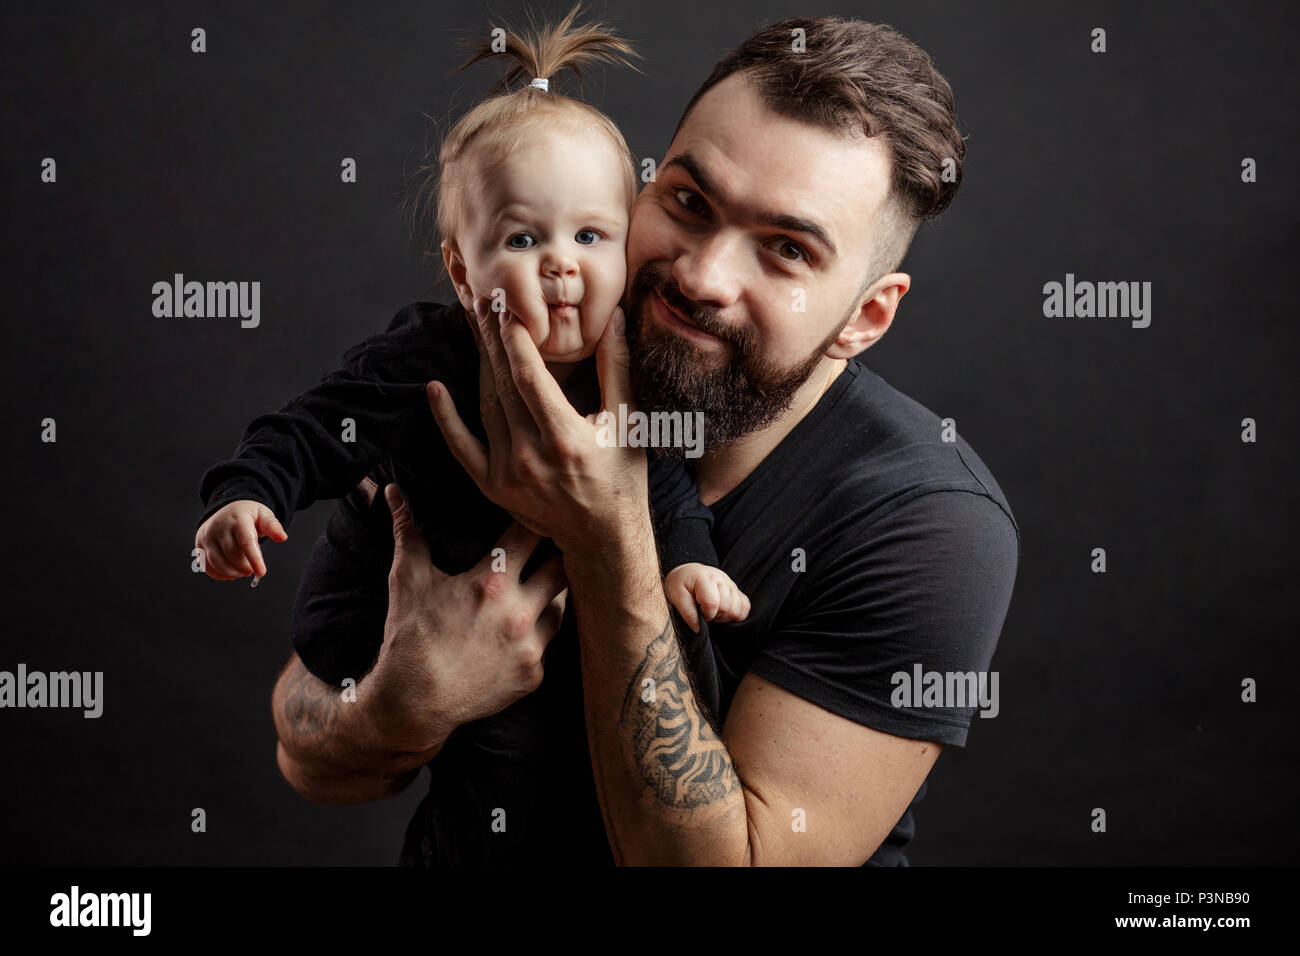 Young athletic father with adorable baby on black background Stock Photo